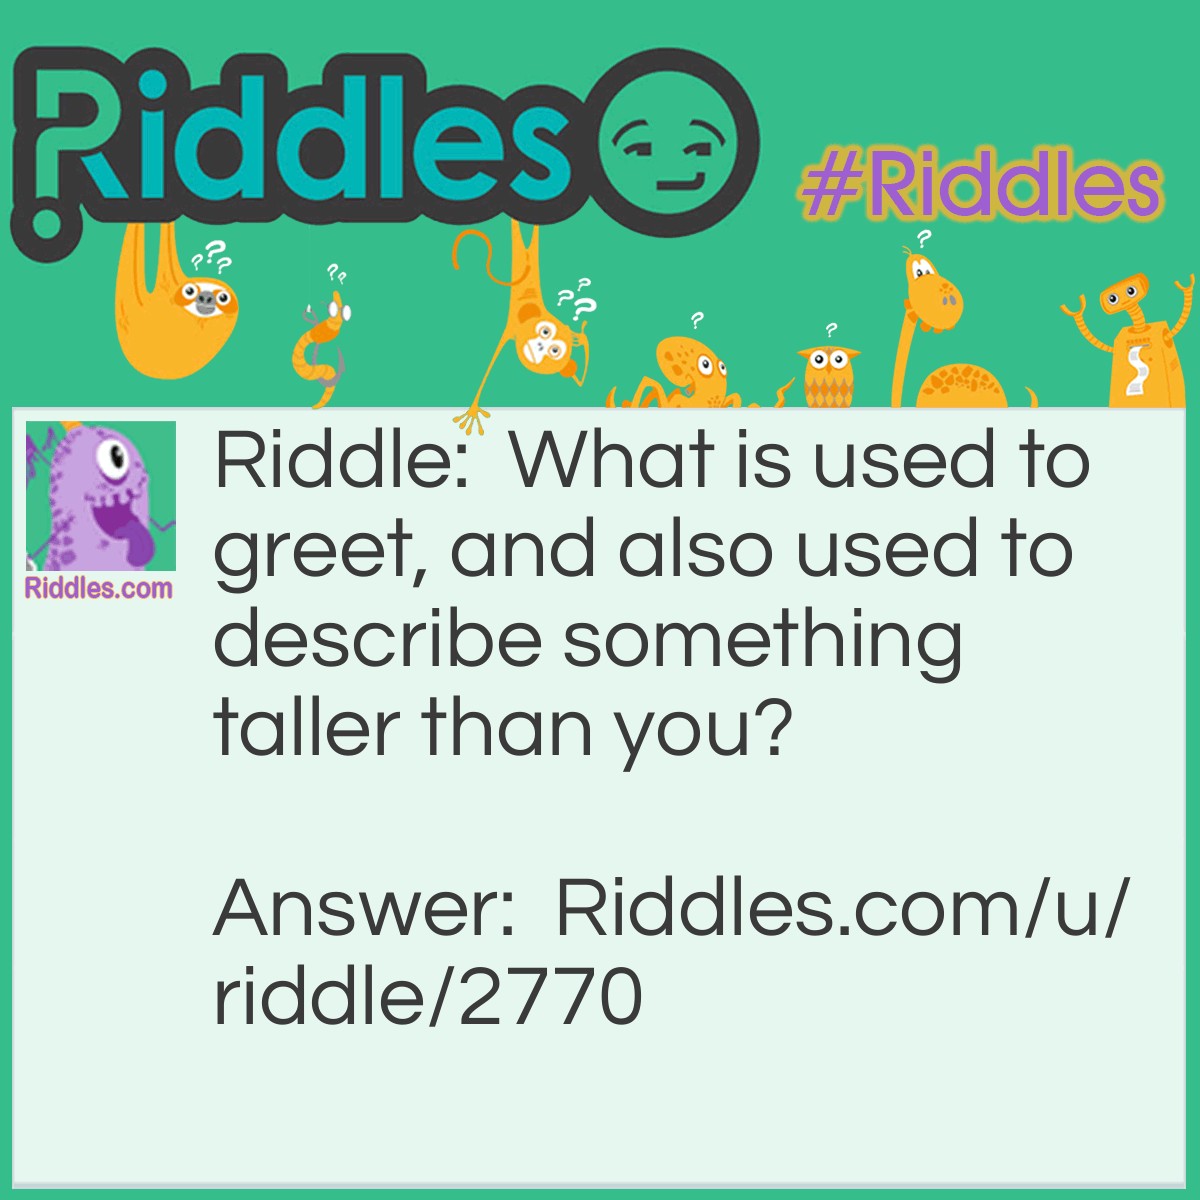 Riddle: What is used to greet, and also used to describe something taller than you? Answer: Hi.